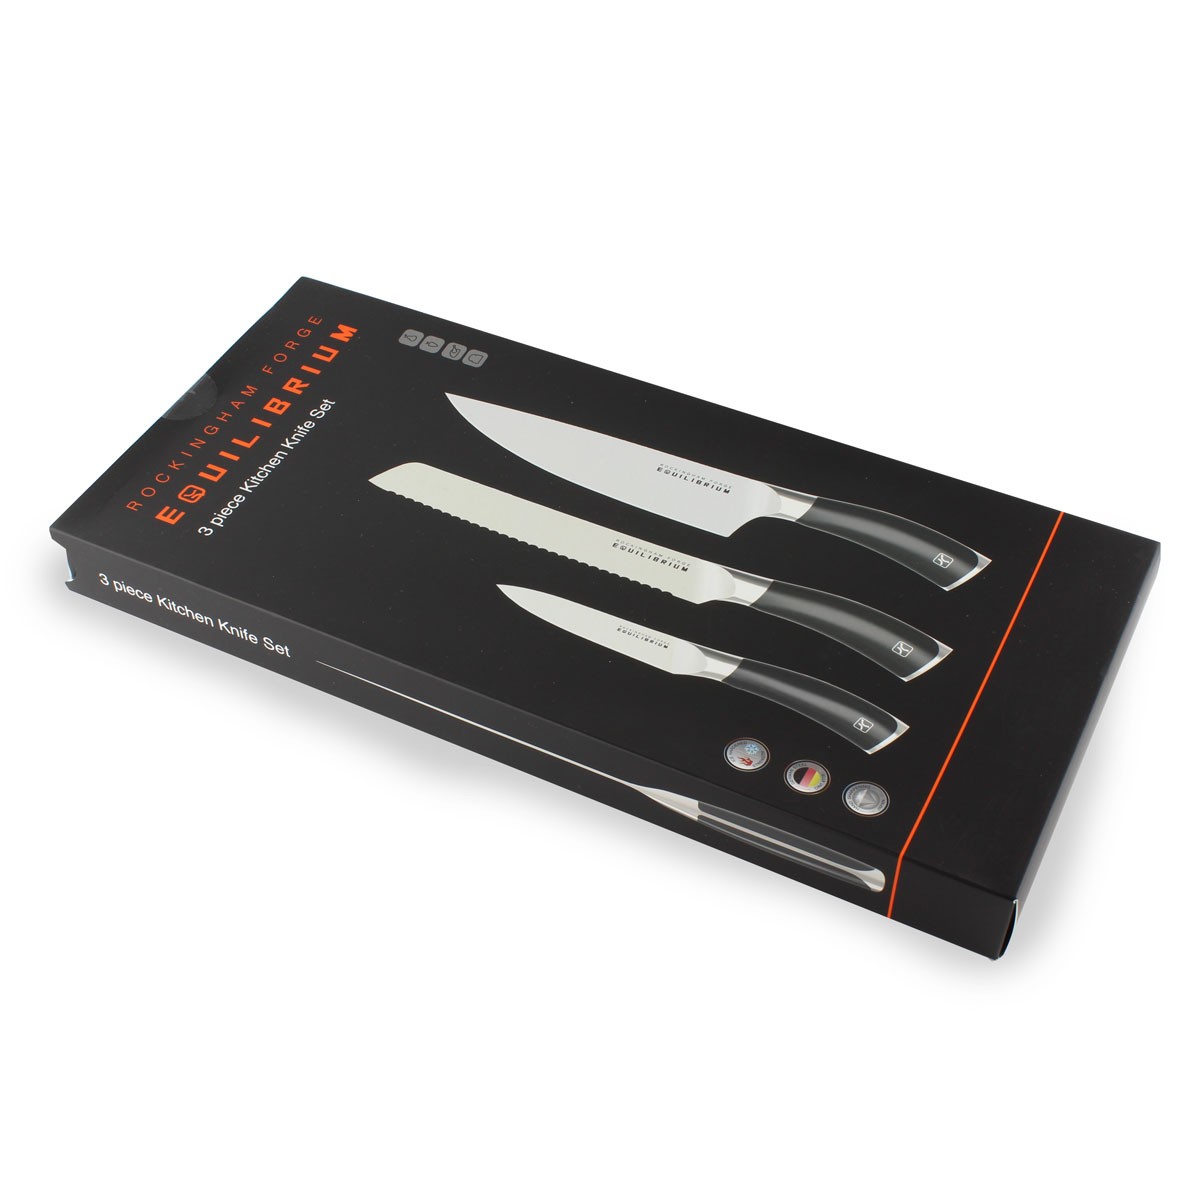 Kitchen Knife Sets in Boxes